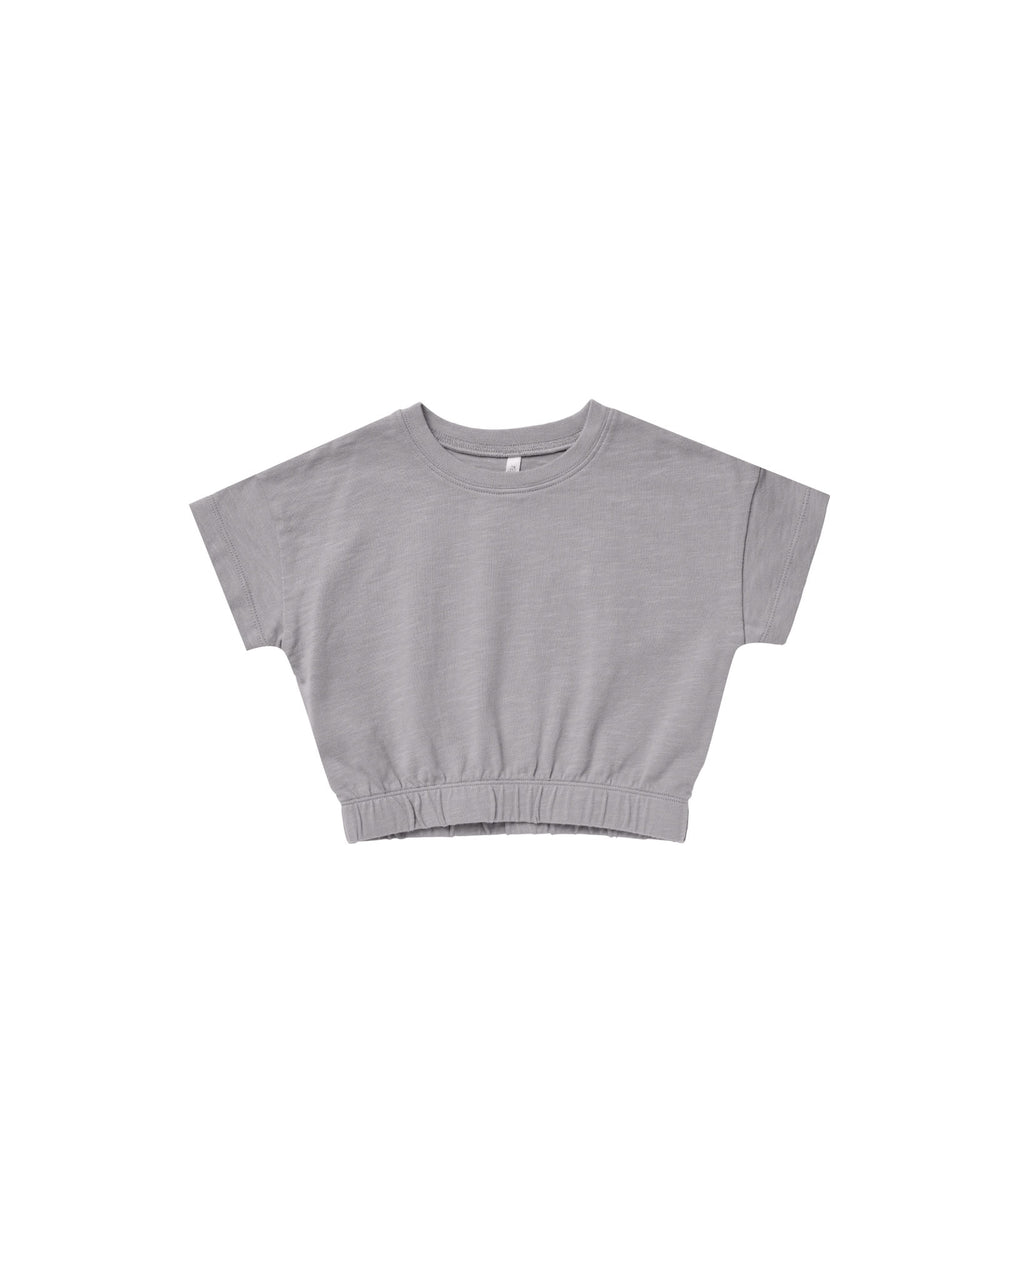 Rylee + Cru Cinched Jersey Tee - French Blue